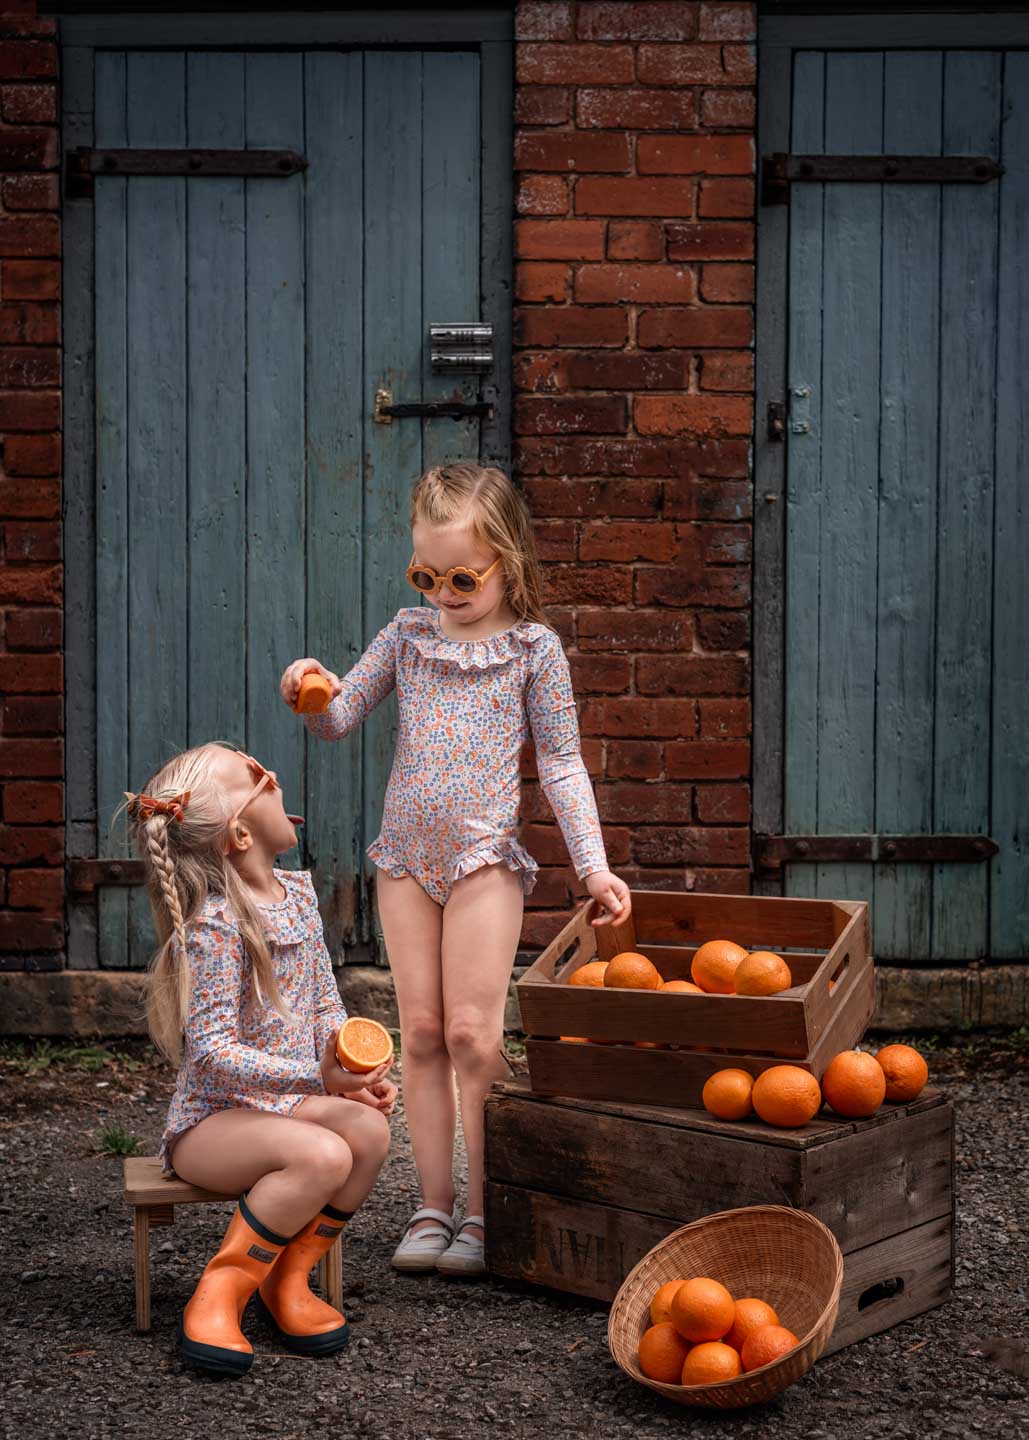 CJPOTY July 2023 shortlisted image for the Summer theme - girls with oranges